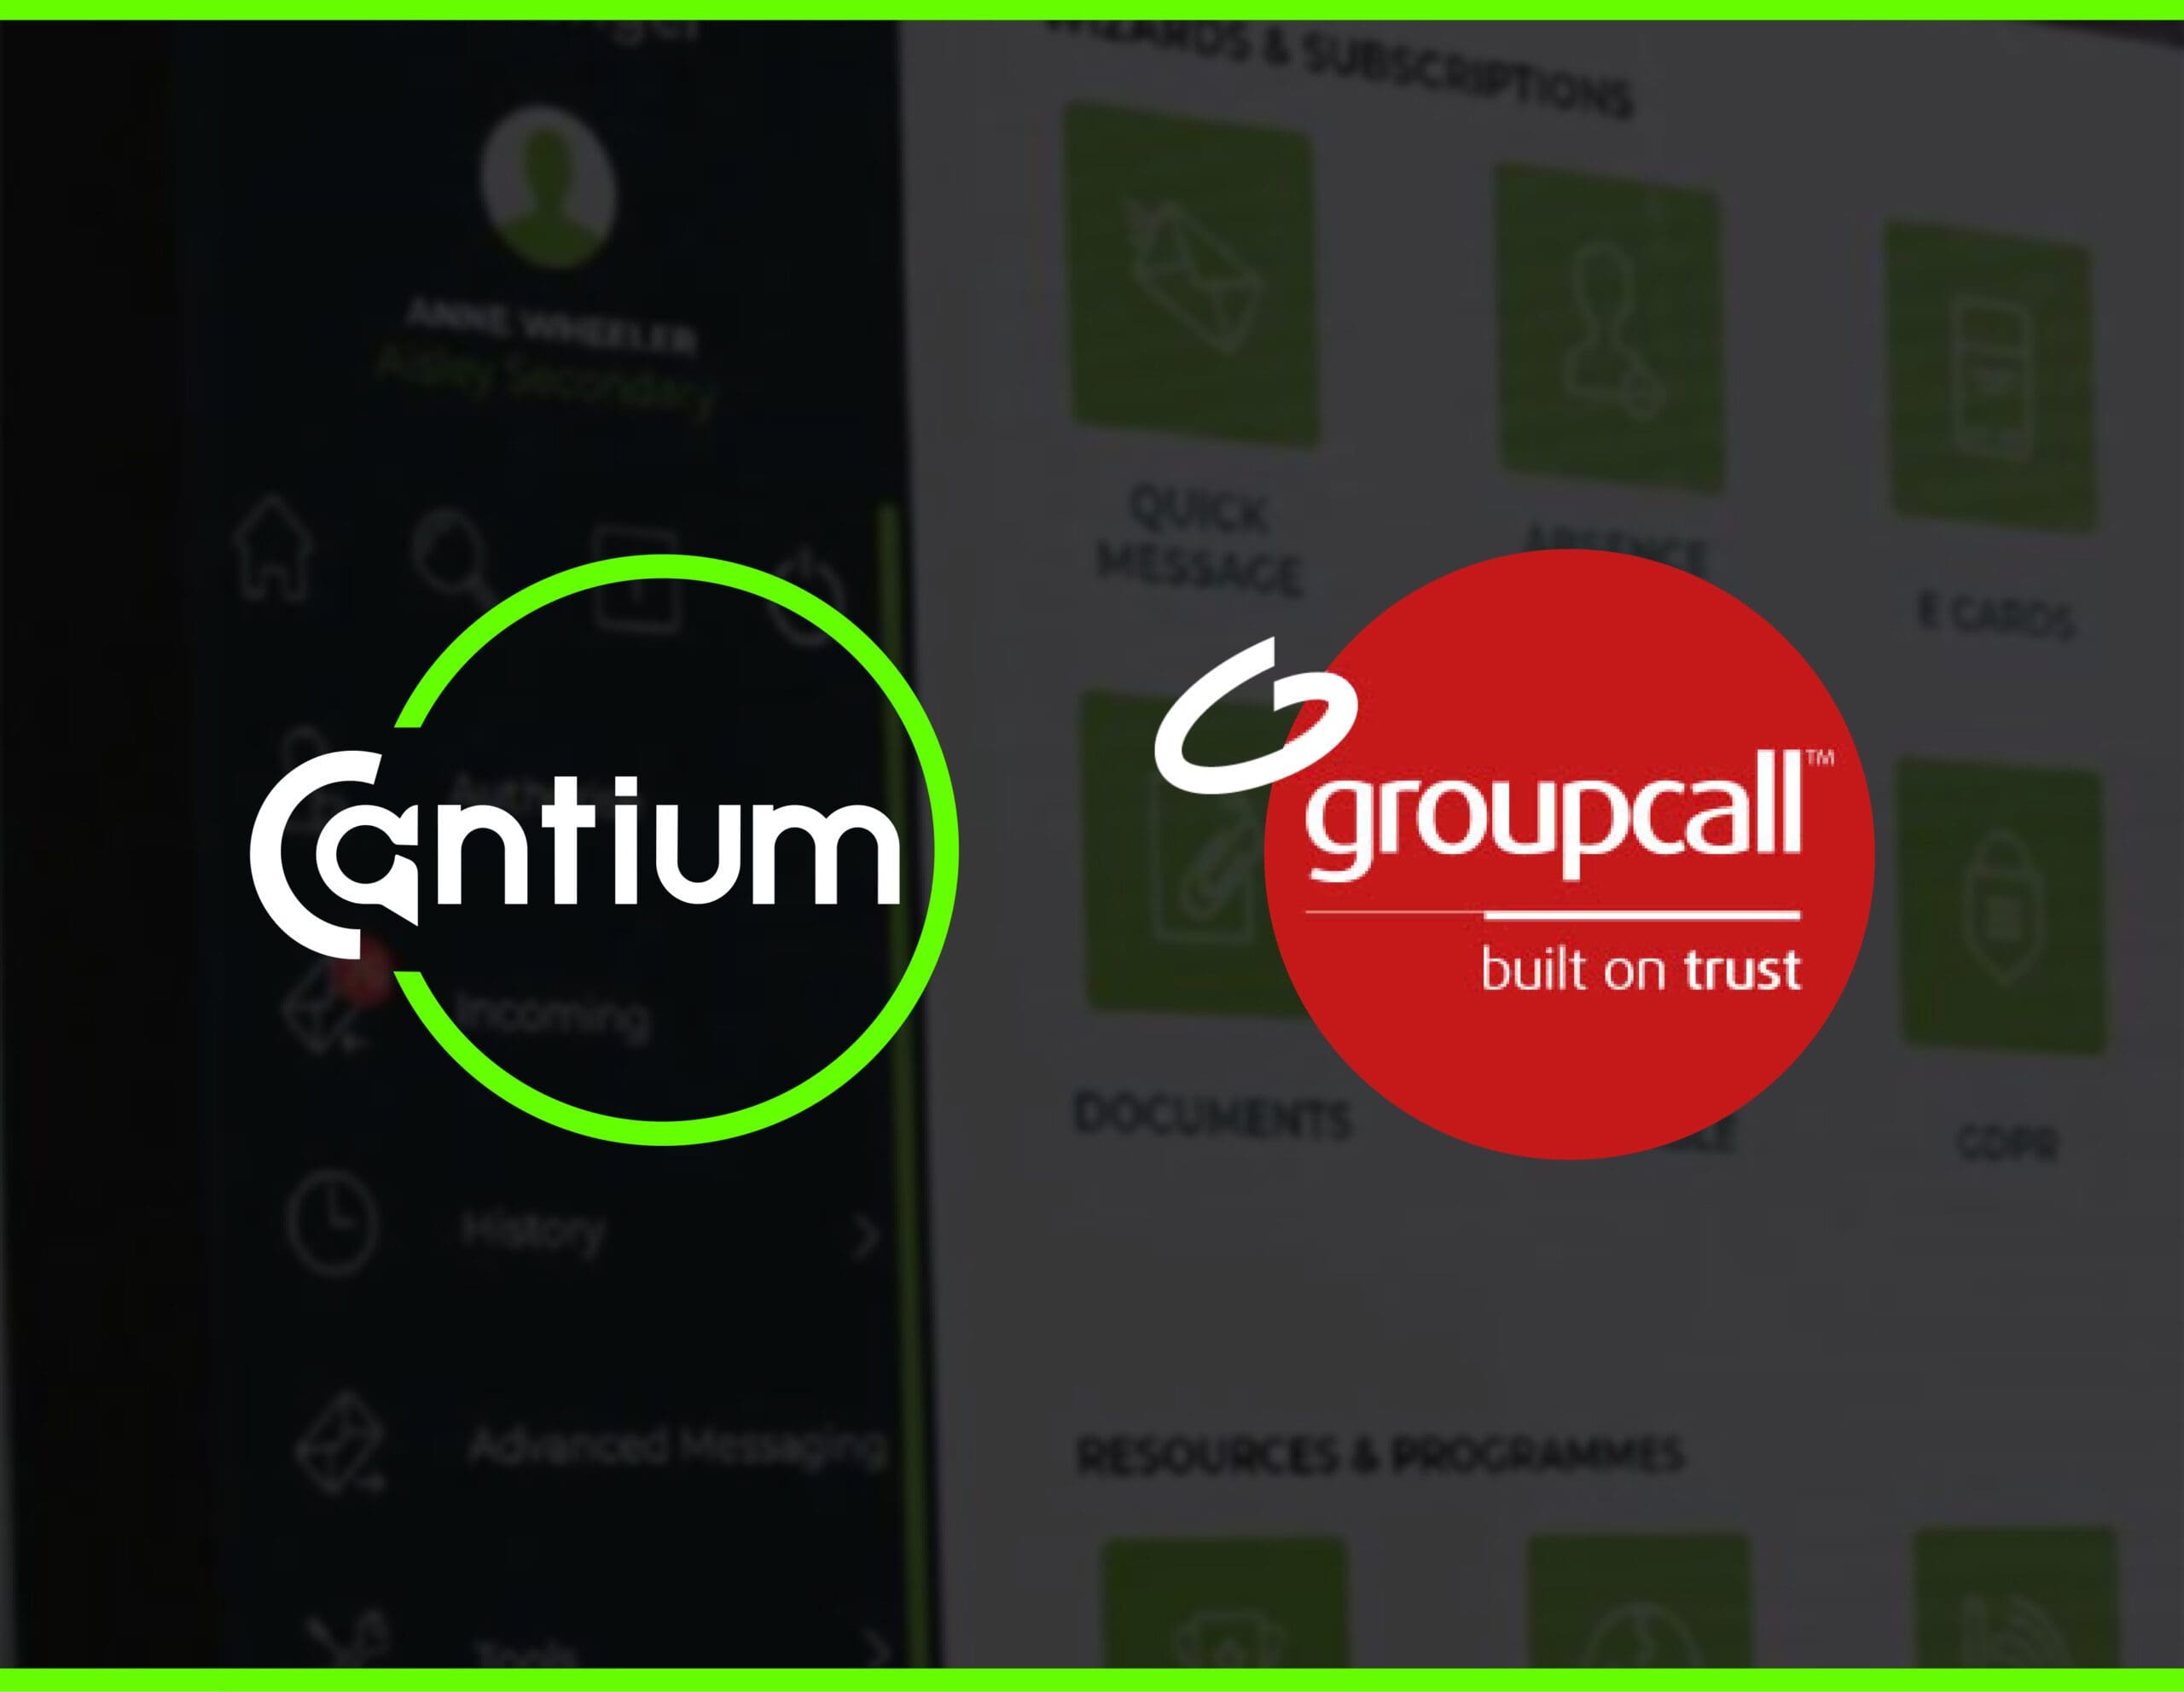 Groupcall scaled